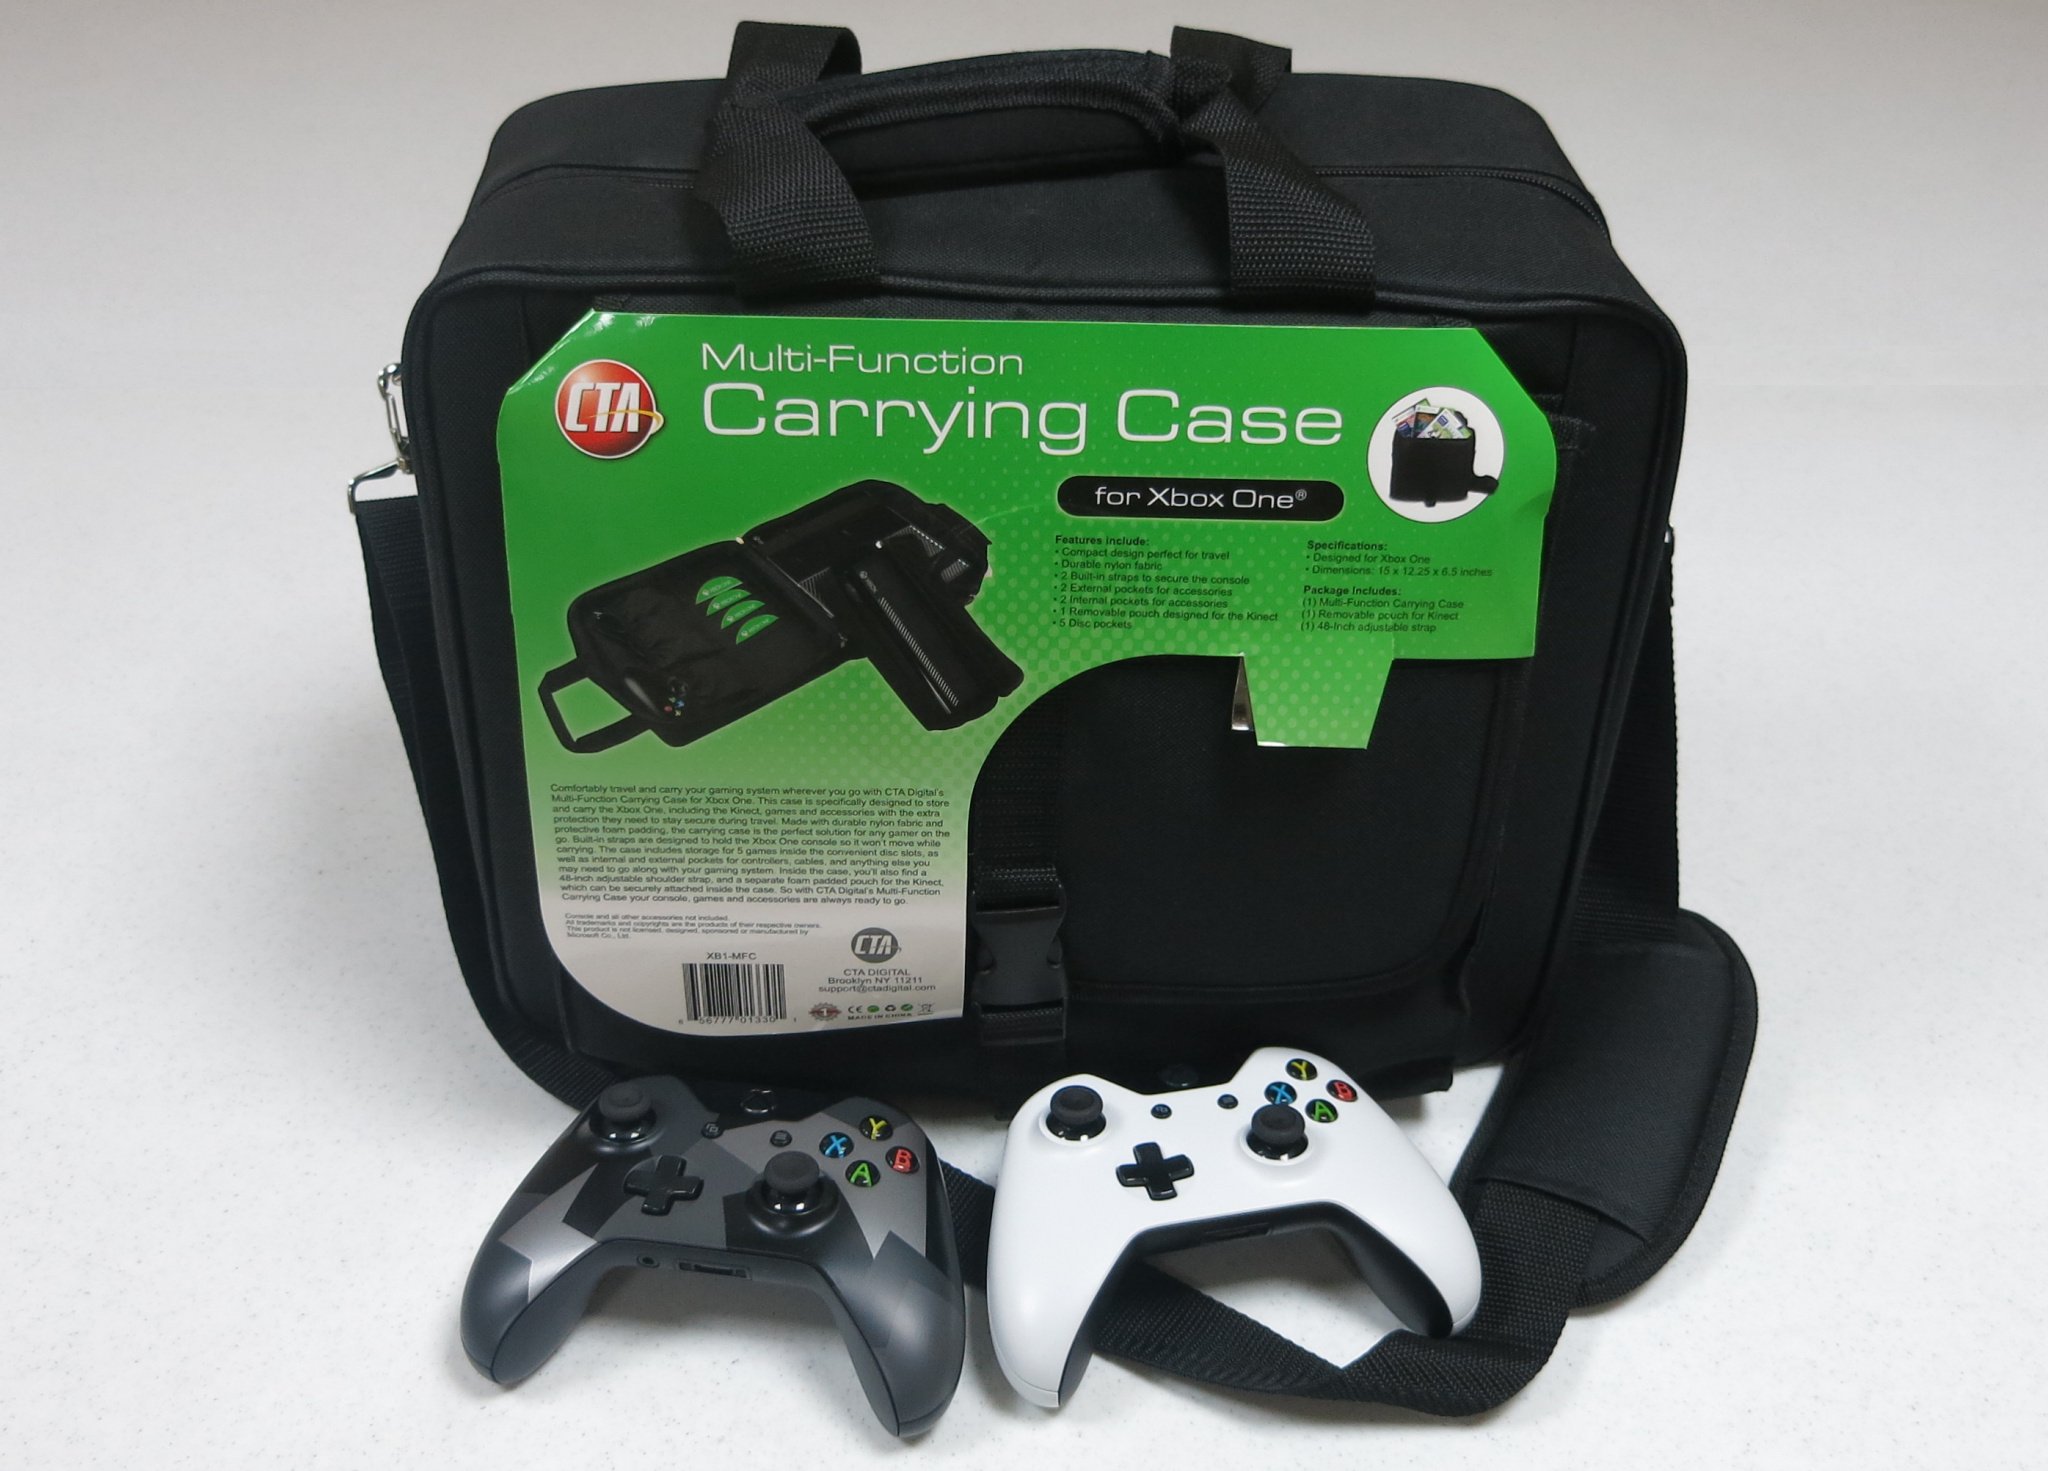 CTA-Digital-Multi-Function-Carrying-Case-for-Xbox-One-main.jpg